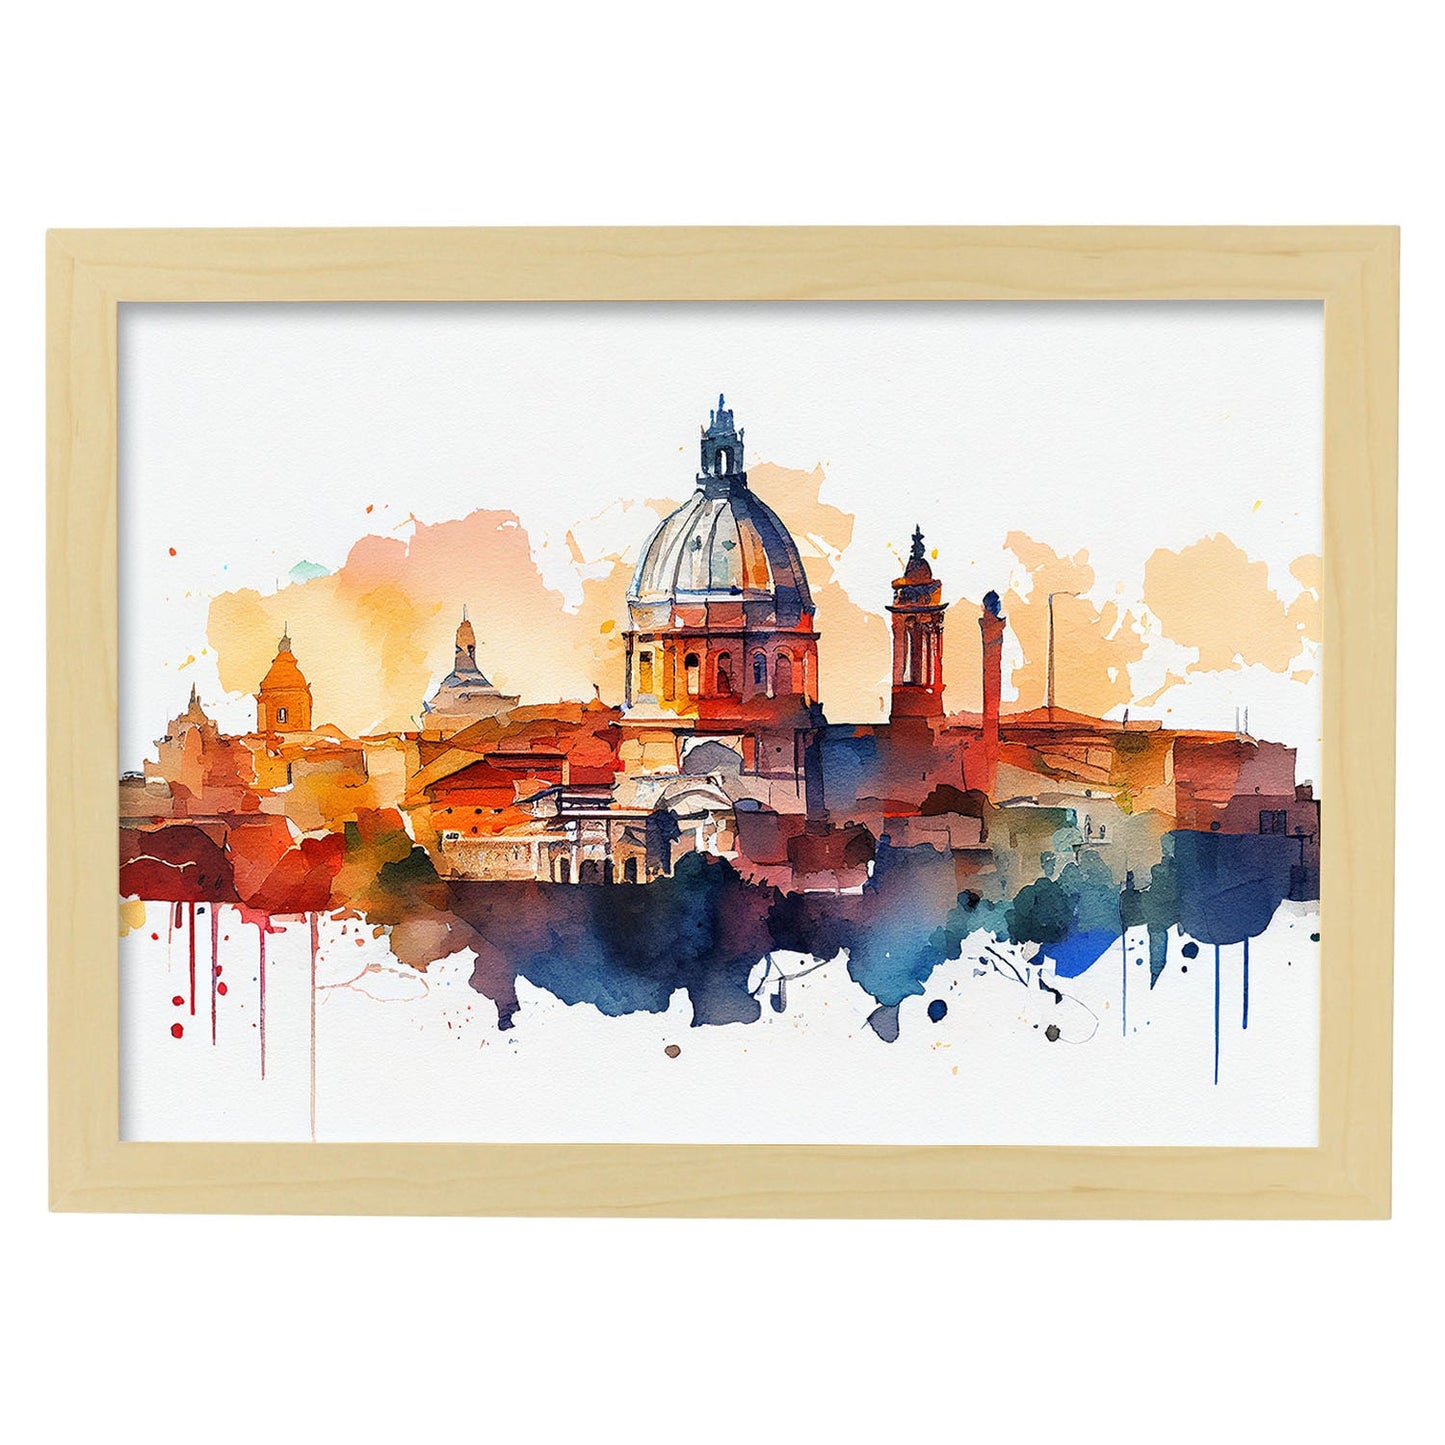 Nacnic watercolor of a skyline of the city of Rome_1. Aesthetic Wall Art Prints for Bedroom or Living Room Design.-Artwork-Nacnic-A4-Marco Madera Clara-Nacnic Estudio SL